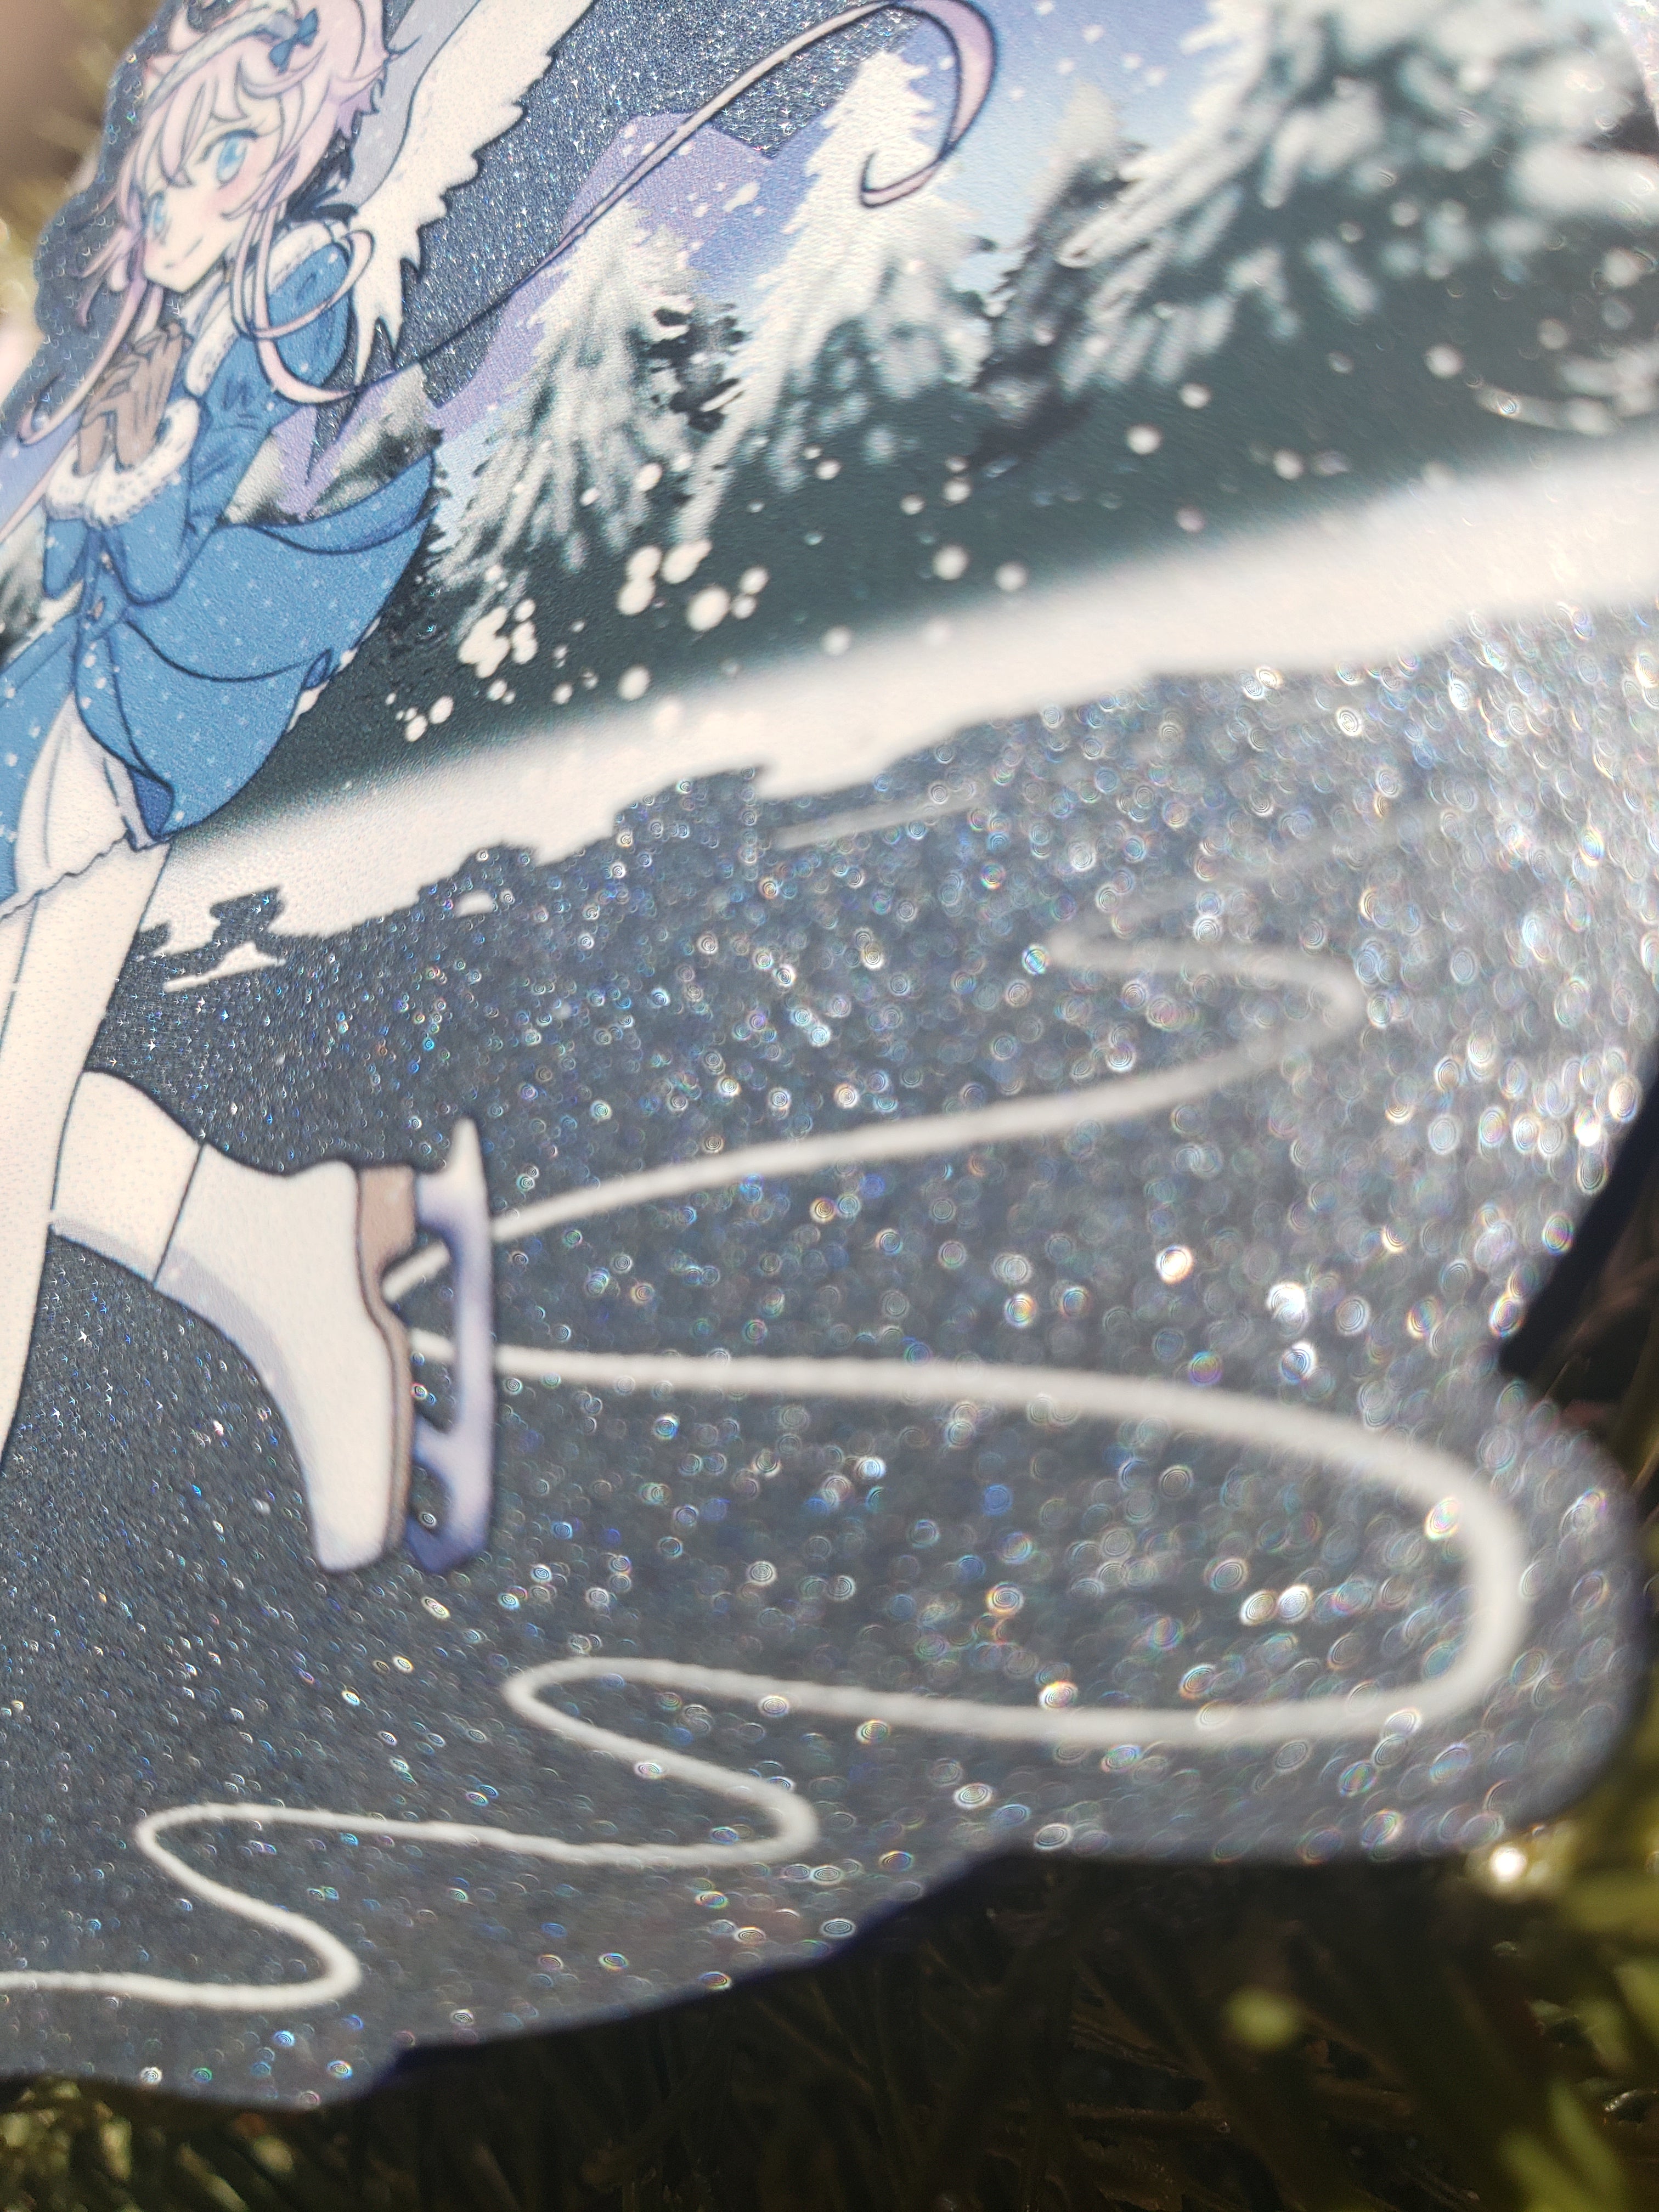 Iceskating snow angel ornament- blue glitter arcylic holiday decoration featuring character from Magical Princess Sky original manga